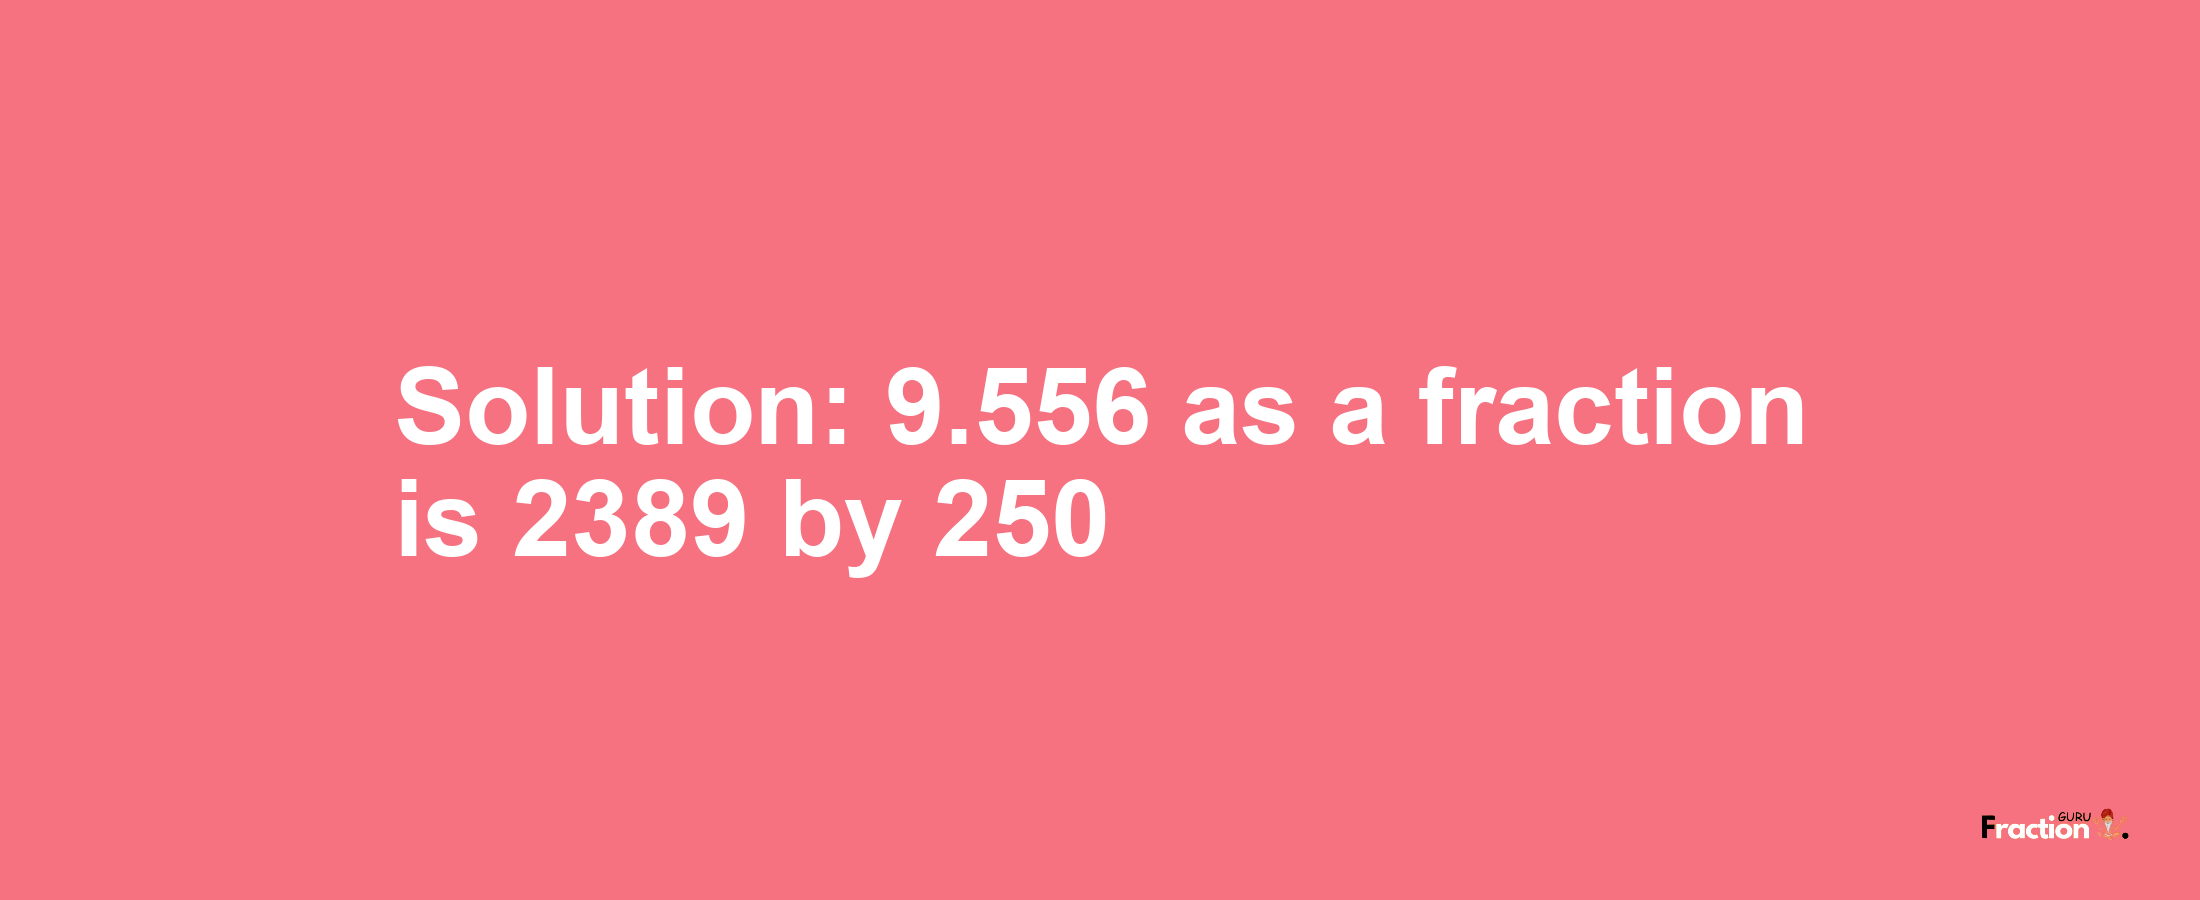 Solution:9.556 as a fraction is 2389/250